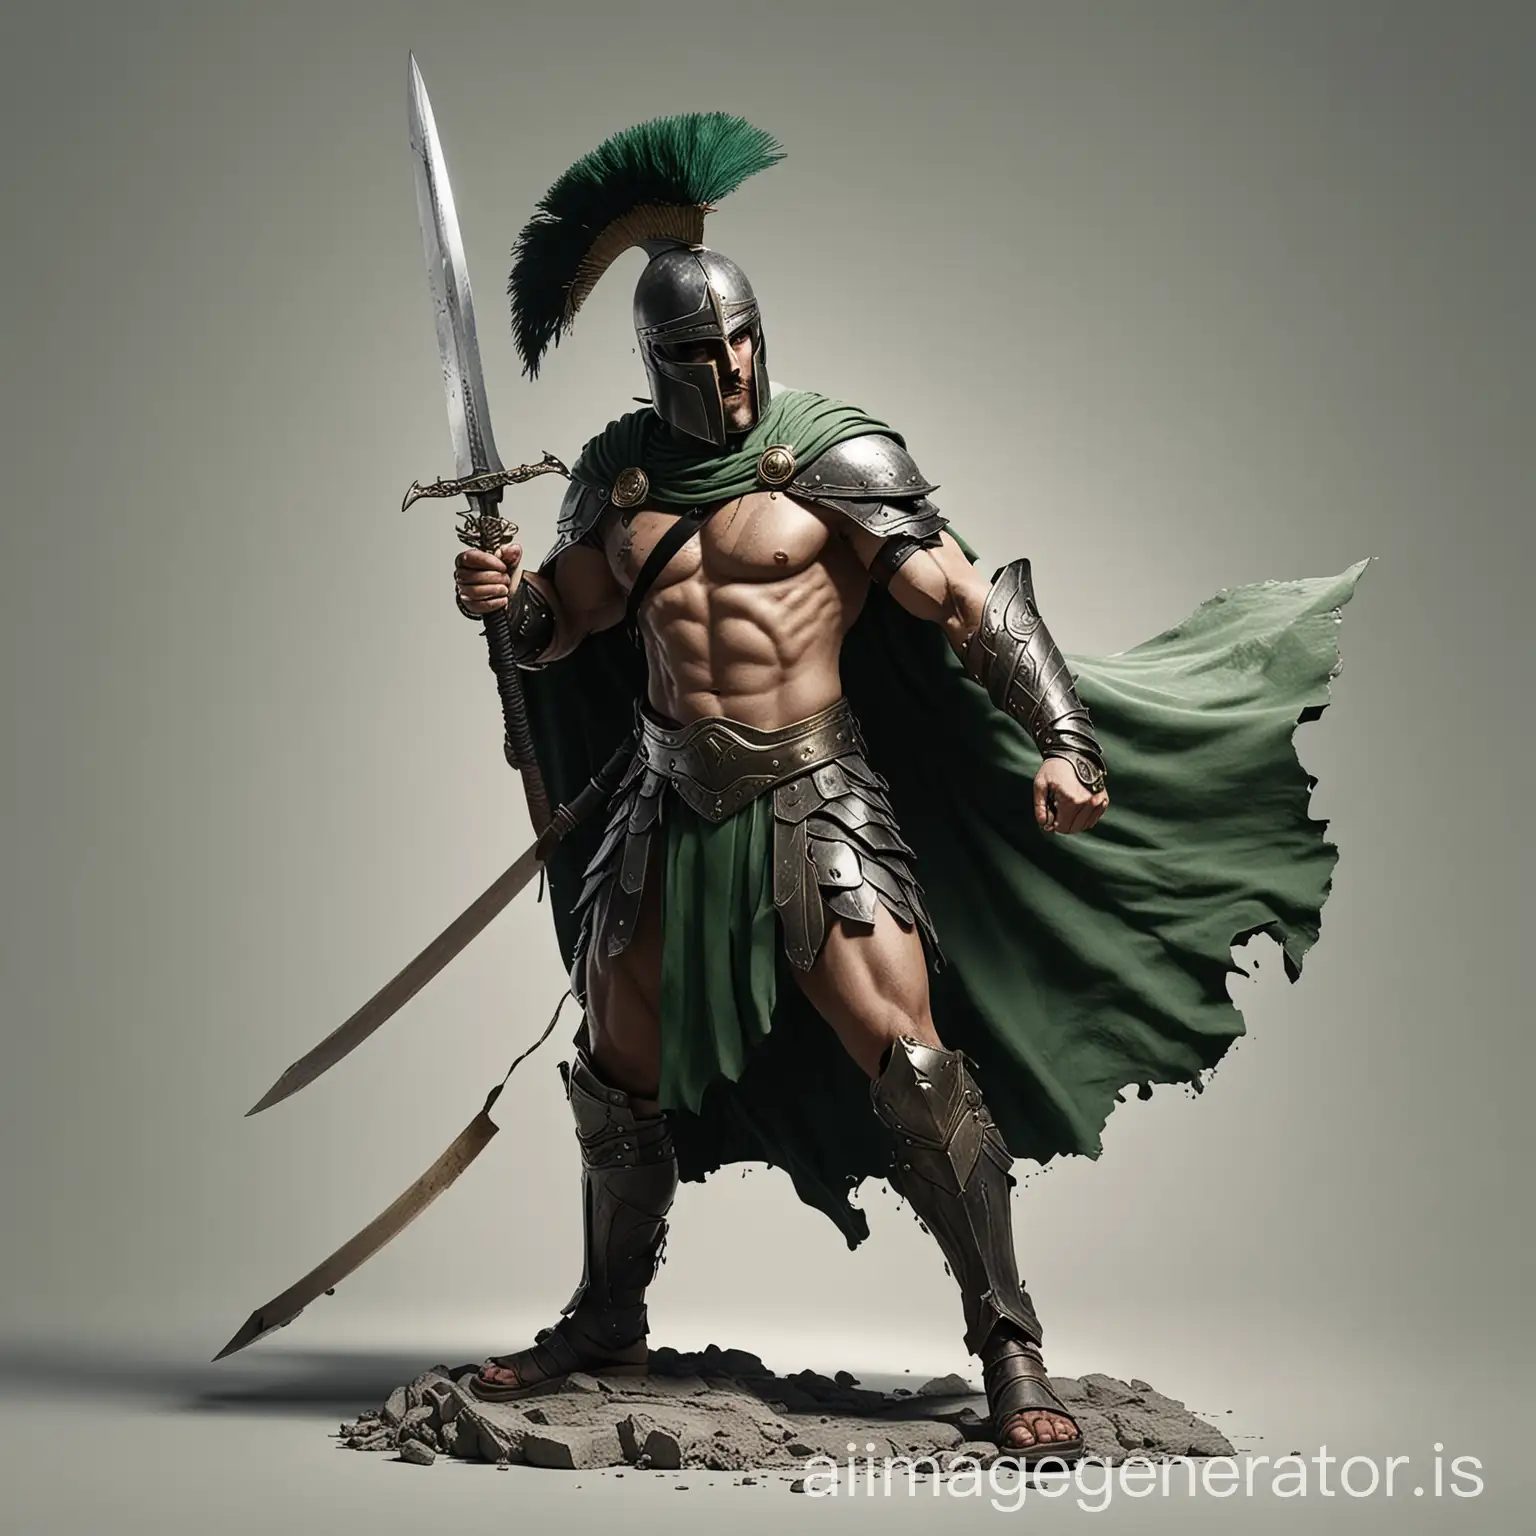 Dynamic-Spartan-Warrior-Illustration-with-Black-Helmet-and-Green-Cape